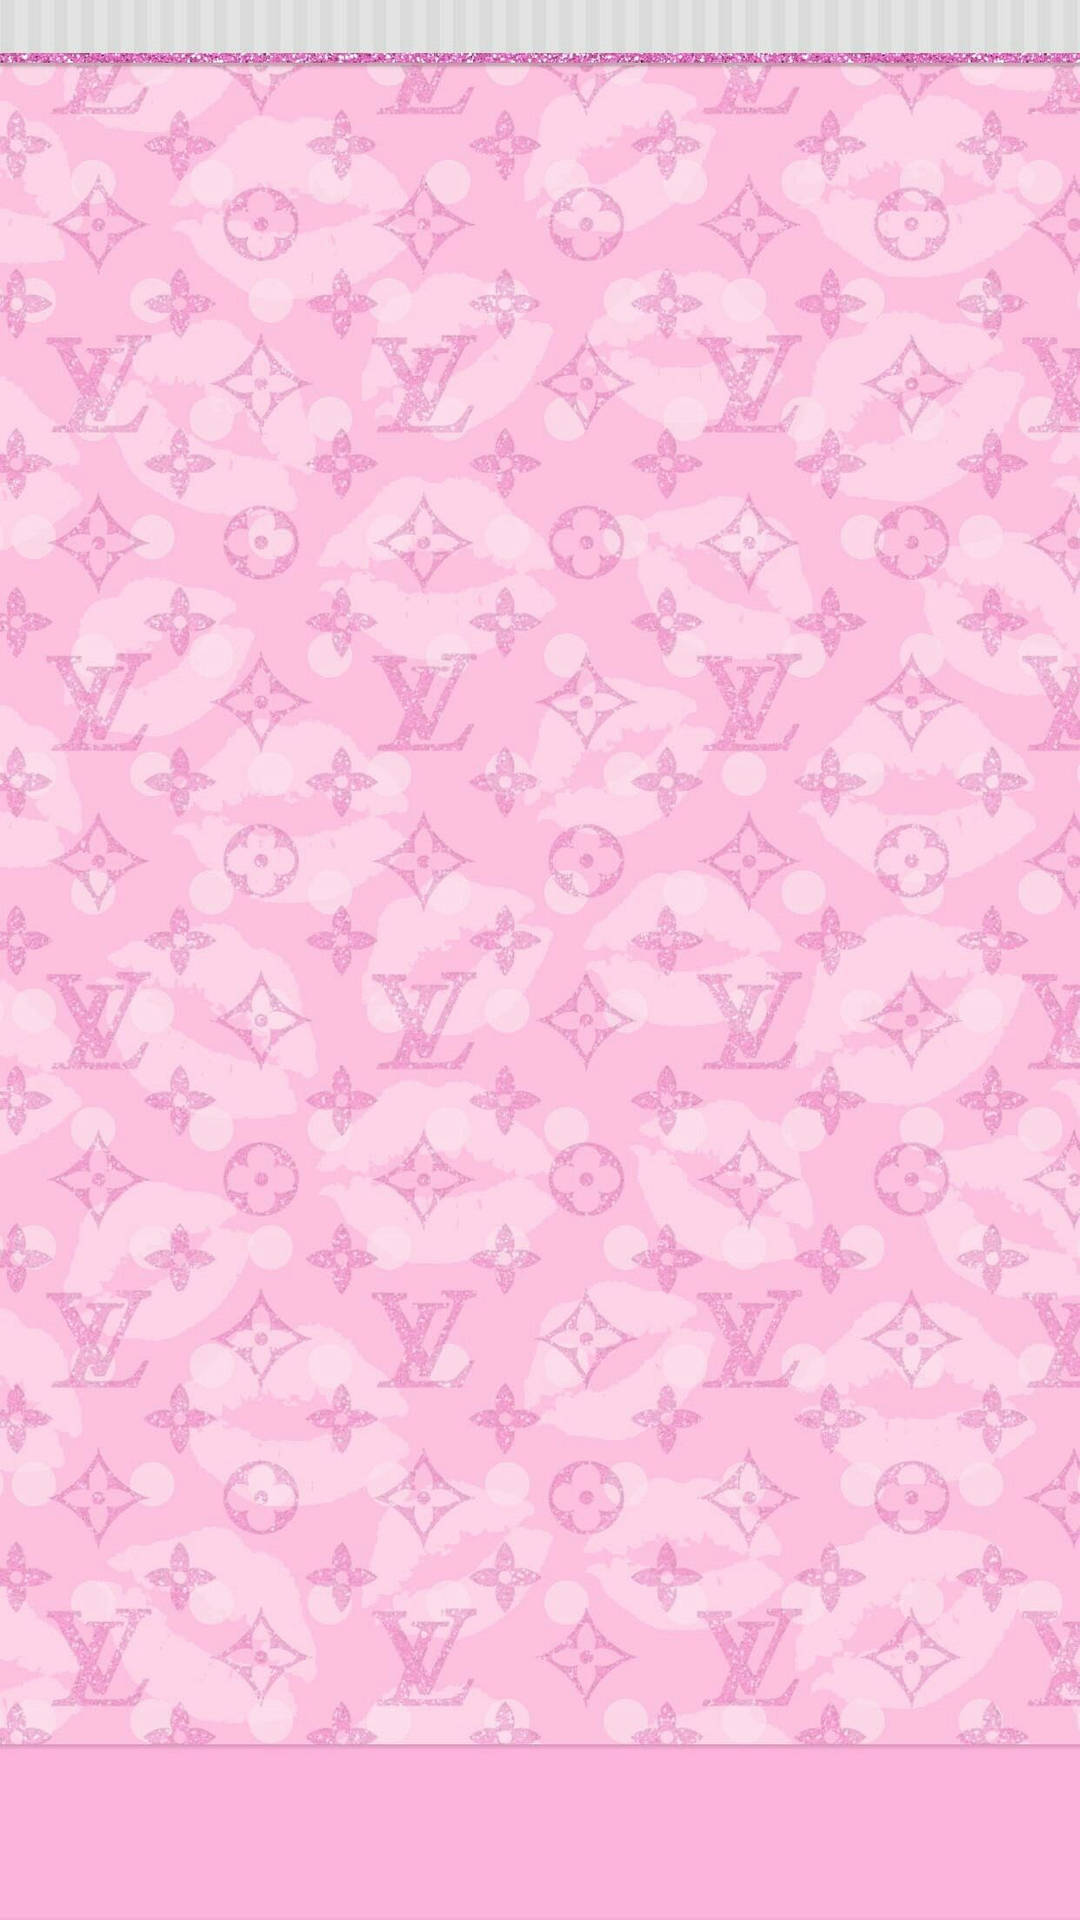 Laid-back Glamour In Pink - The Lv Monogram Pattern